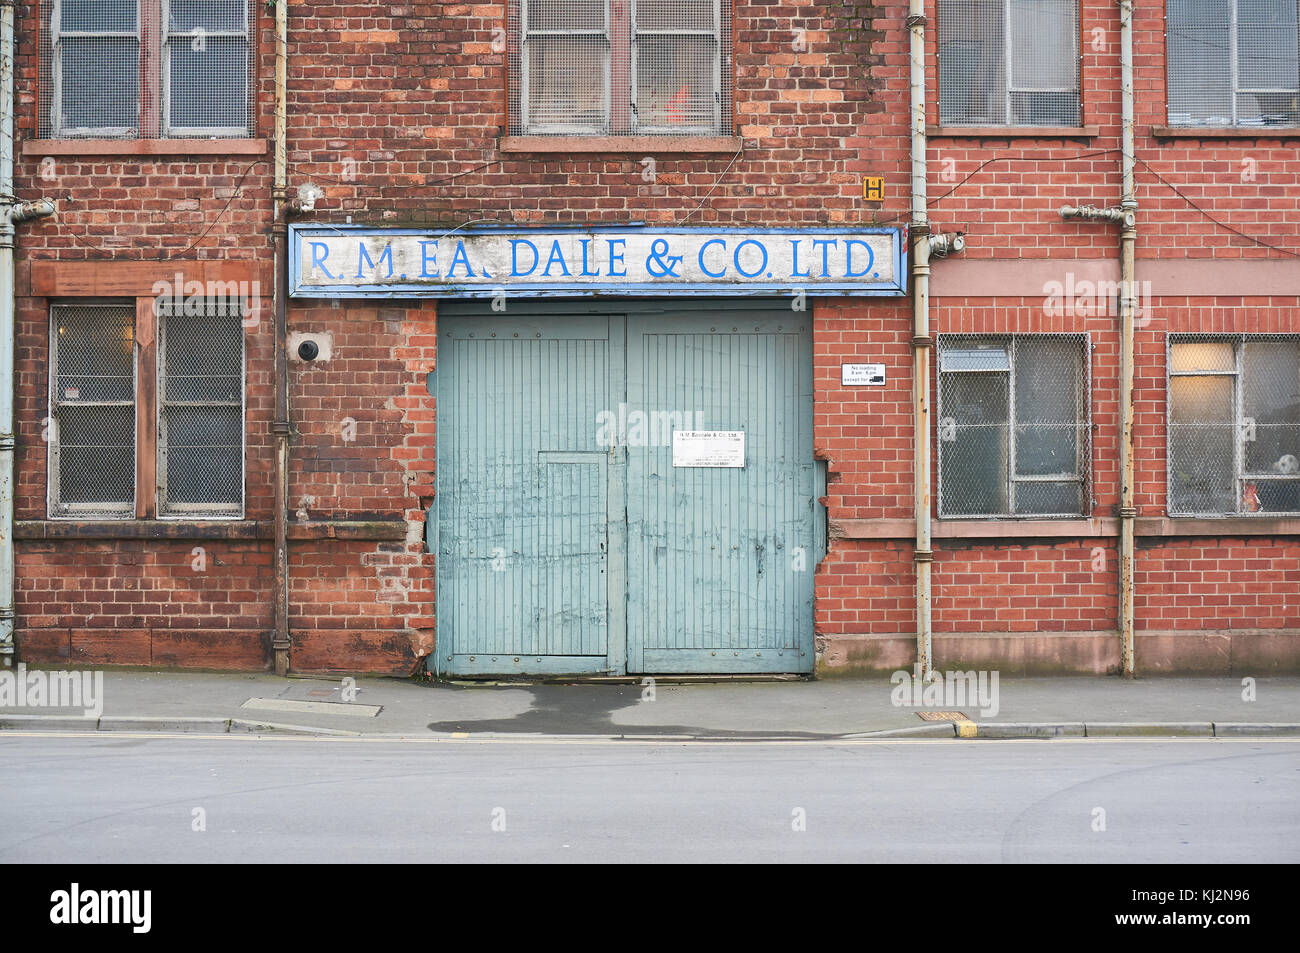 Glasgow, UK - 6 November 2017 : An old gate and a company sign on a historic red brick building. Stock Photo